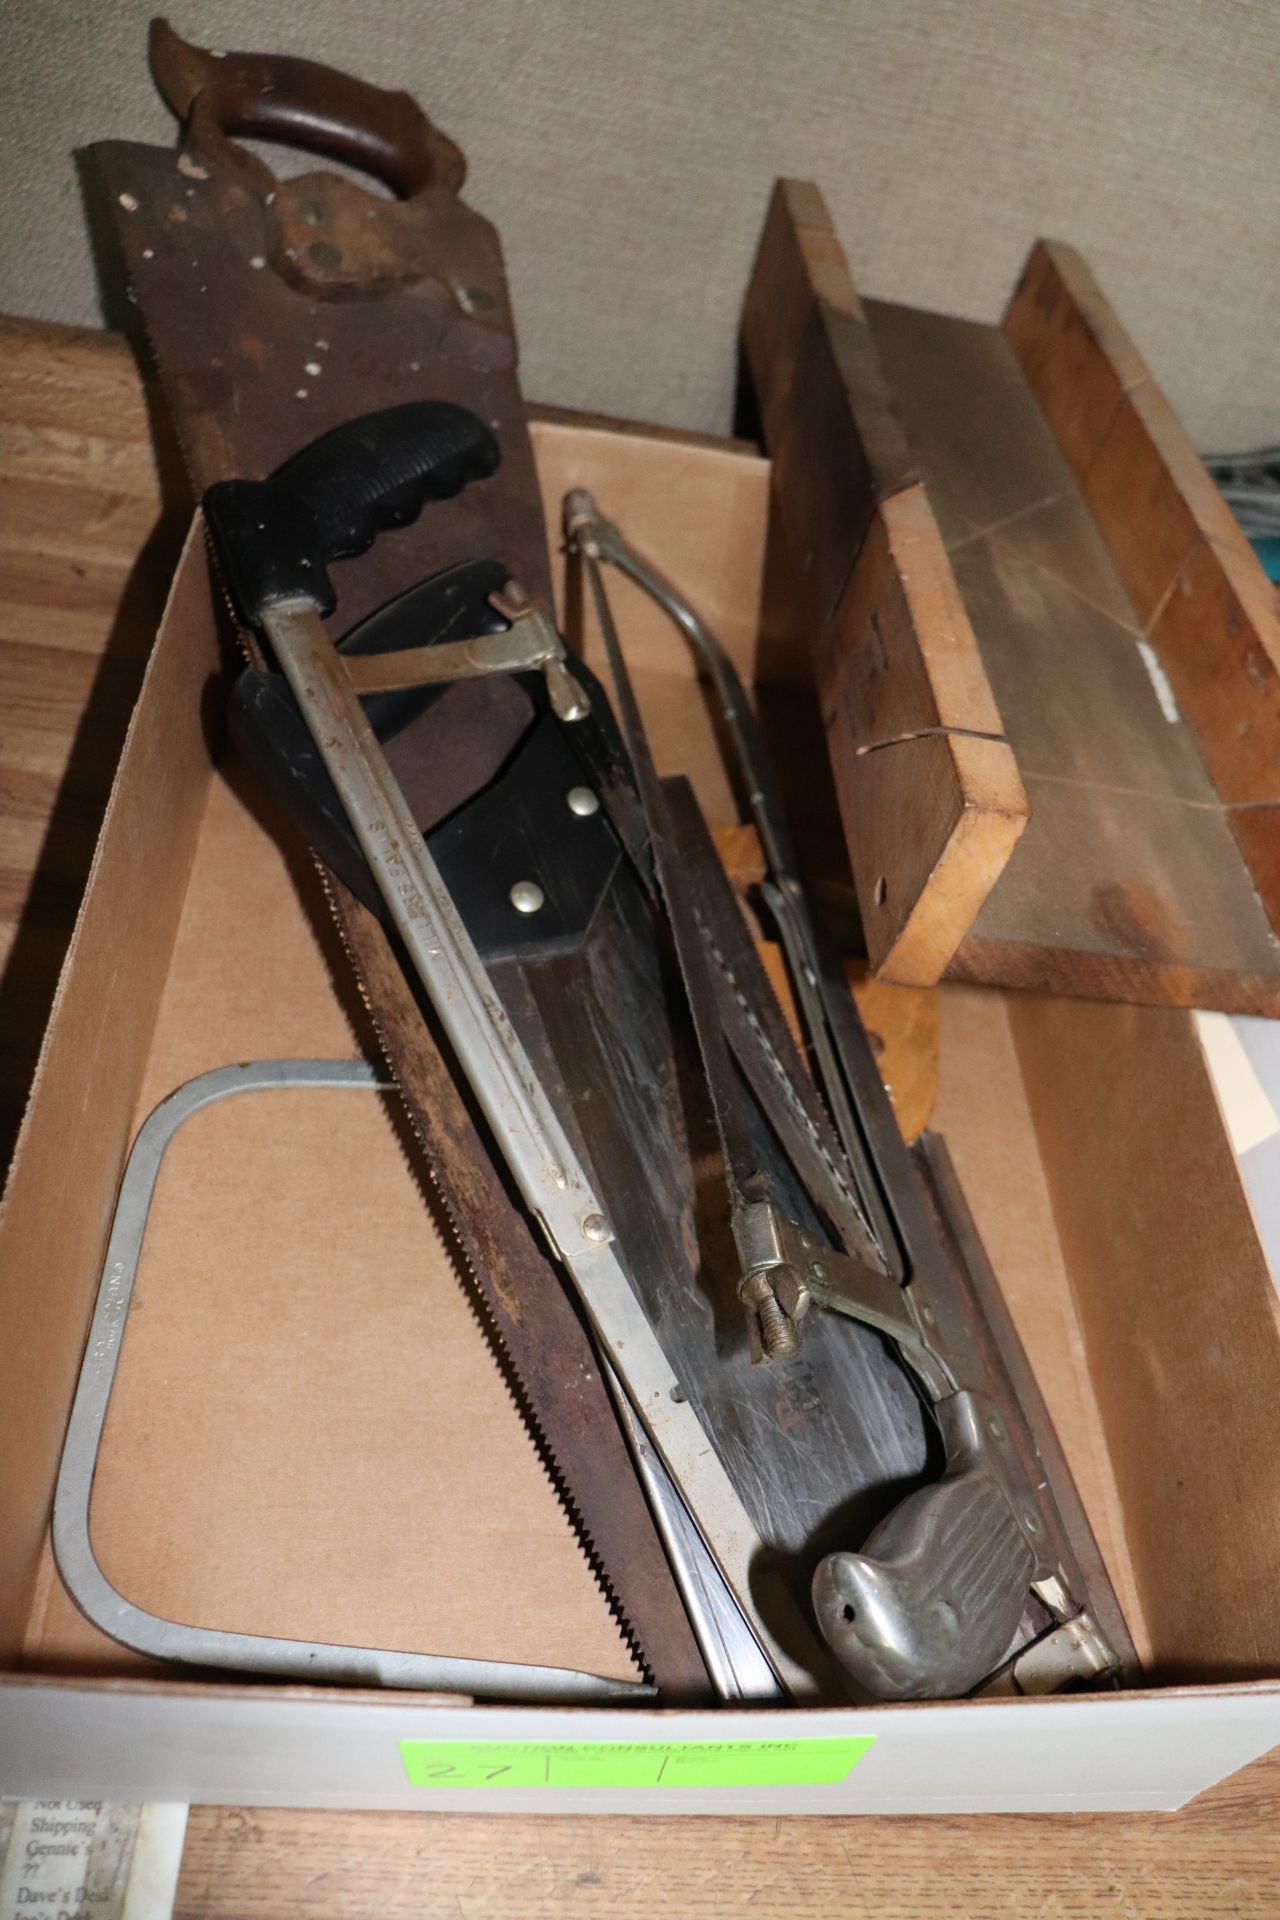 Group of saws and miter box